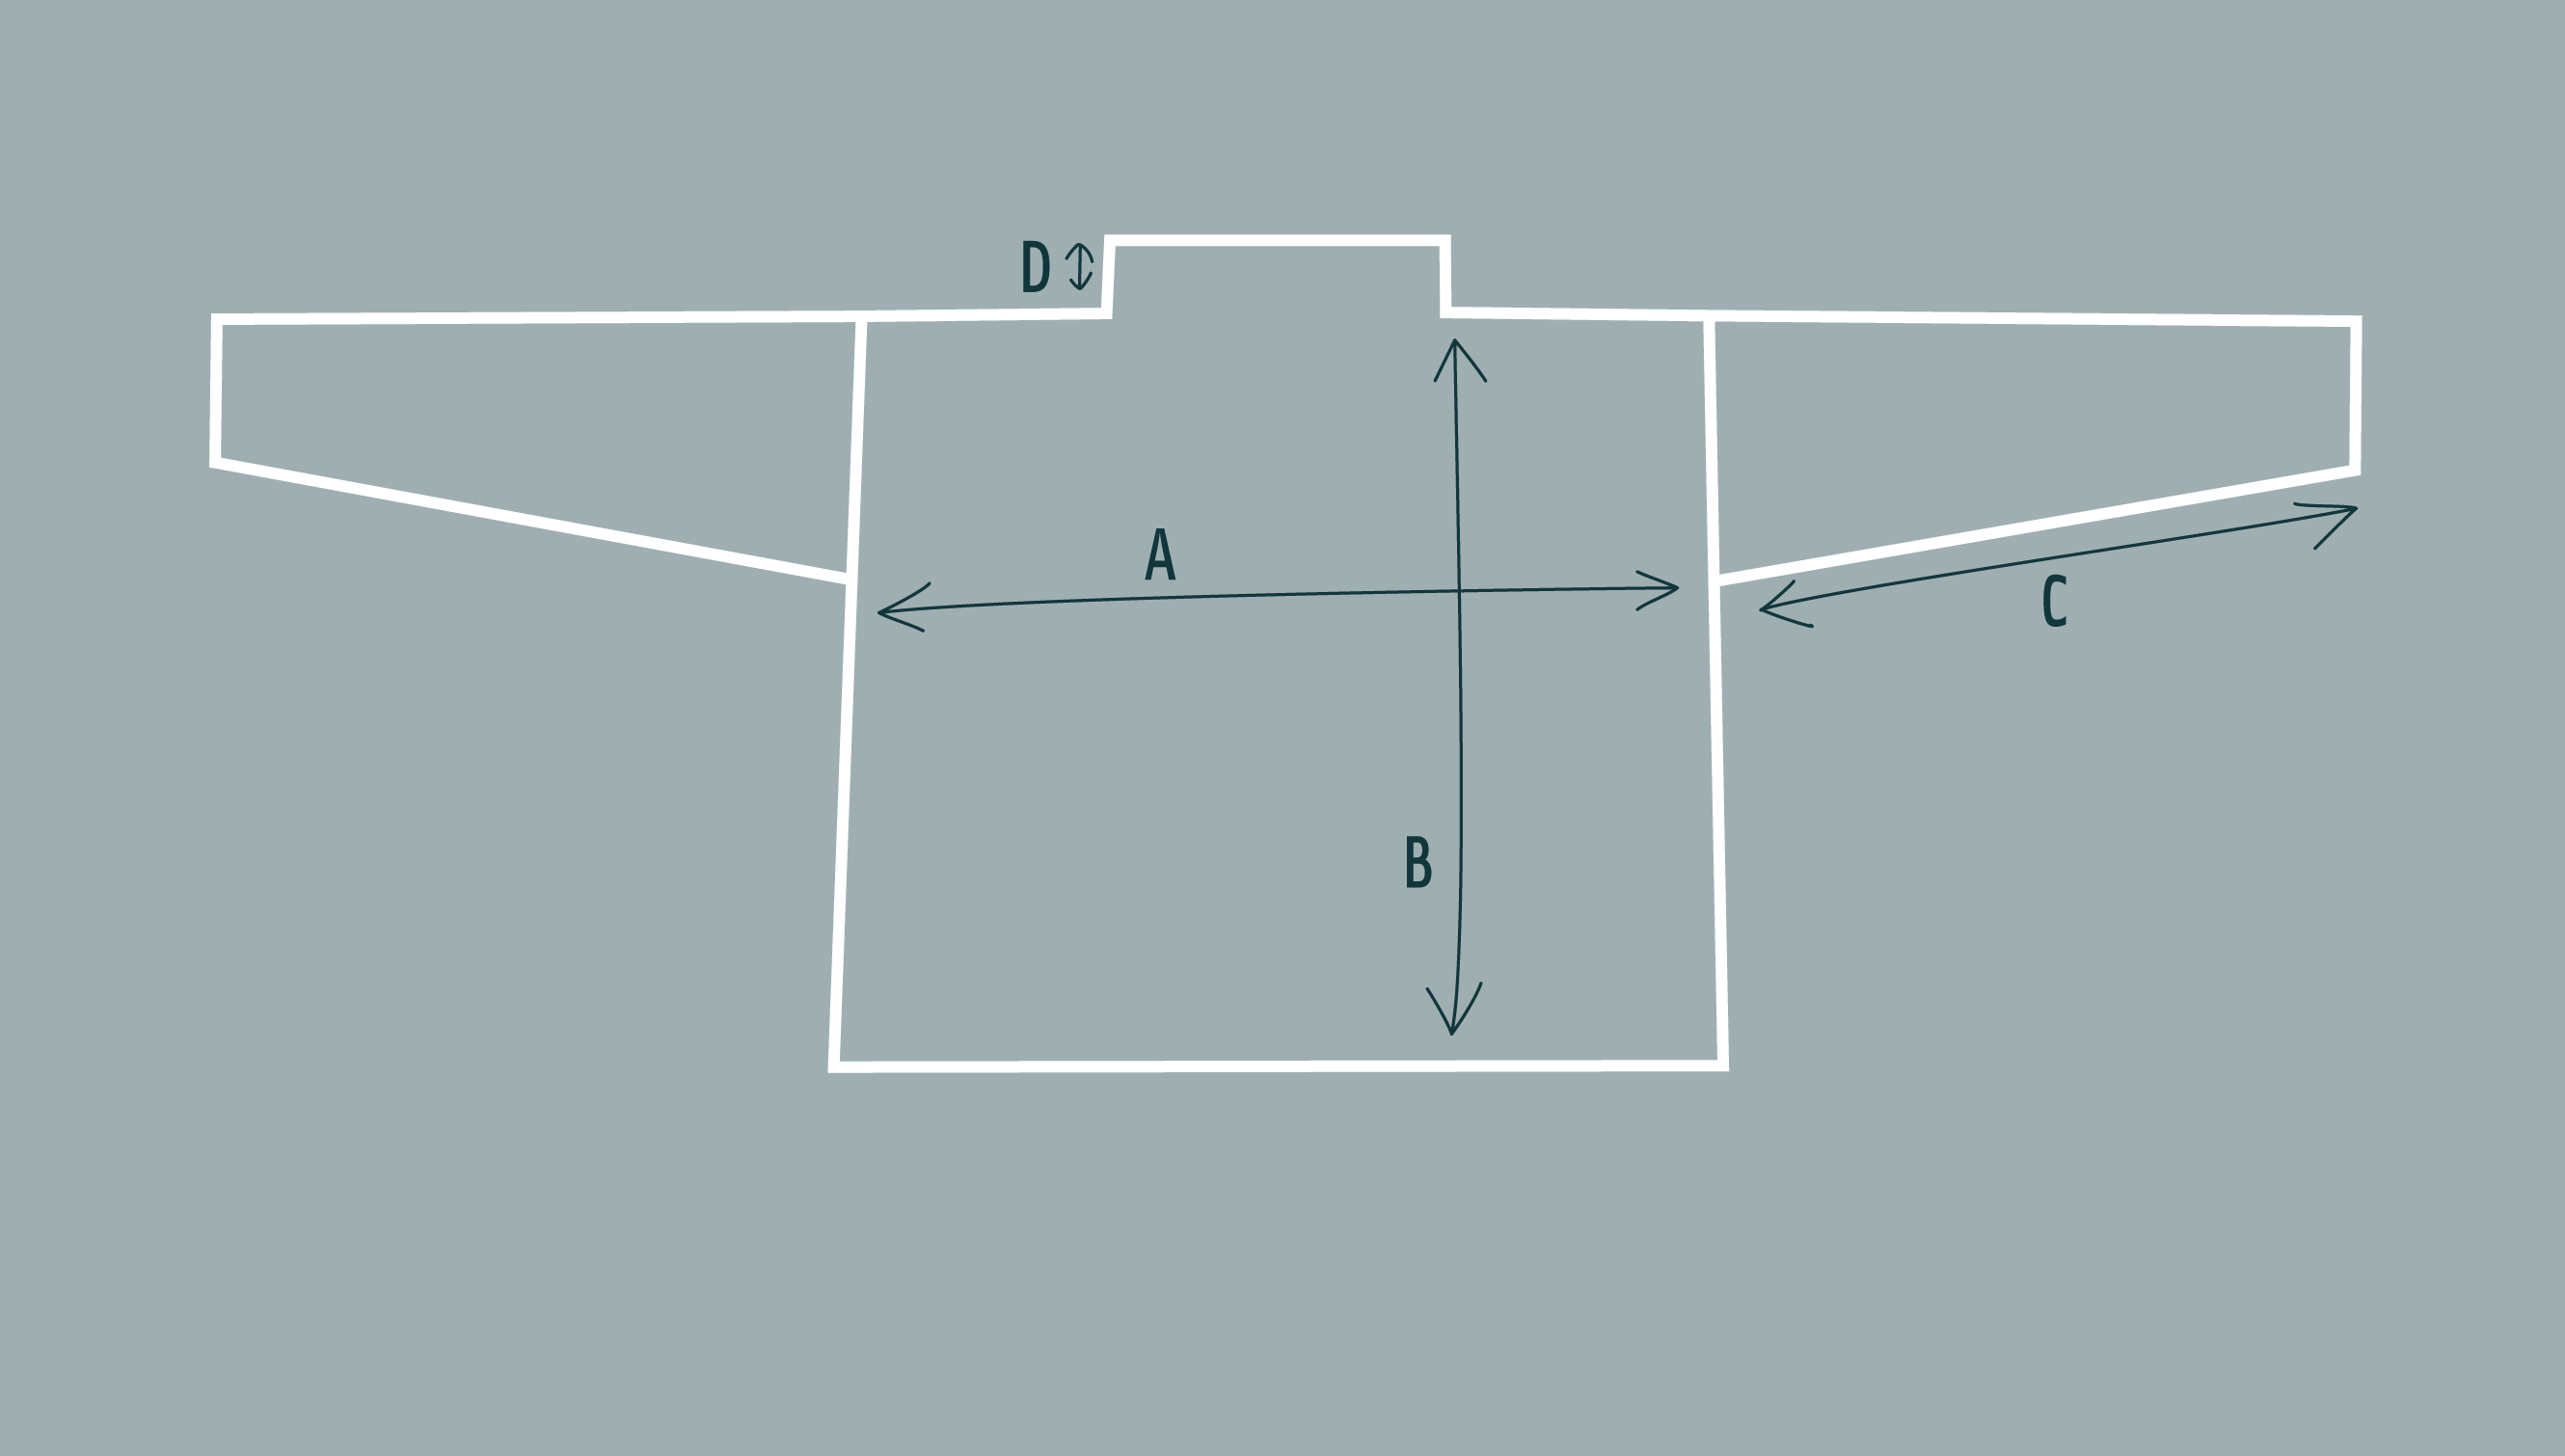 Diagram of boxy jumper with a high neck. Drawn in white on blue.